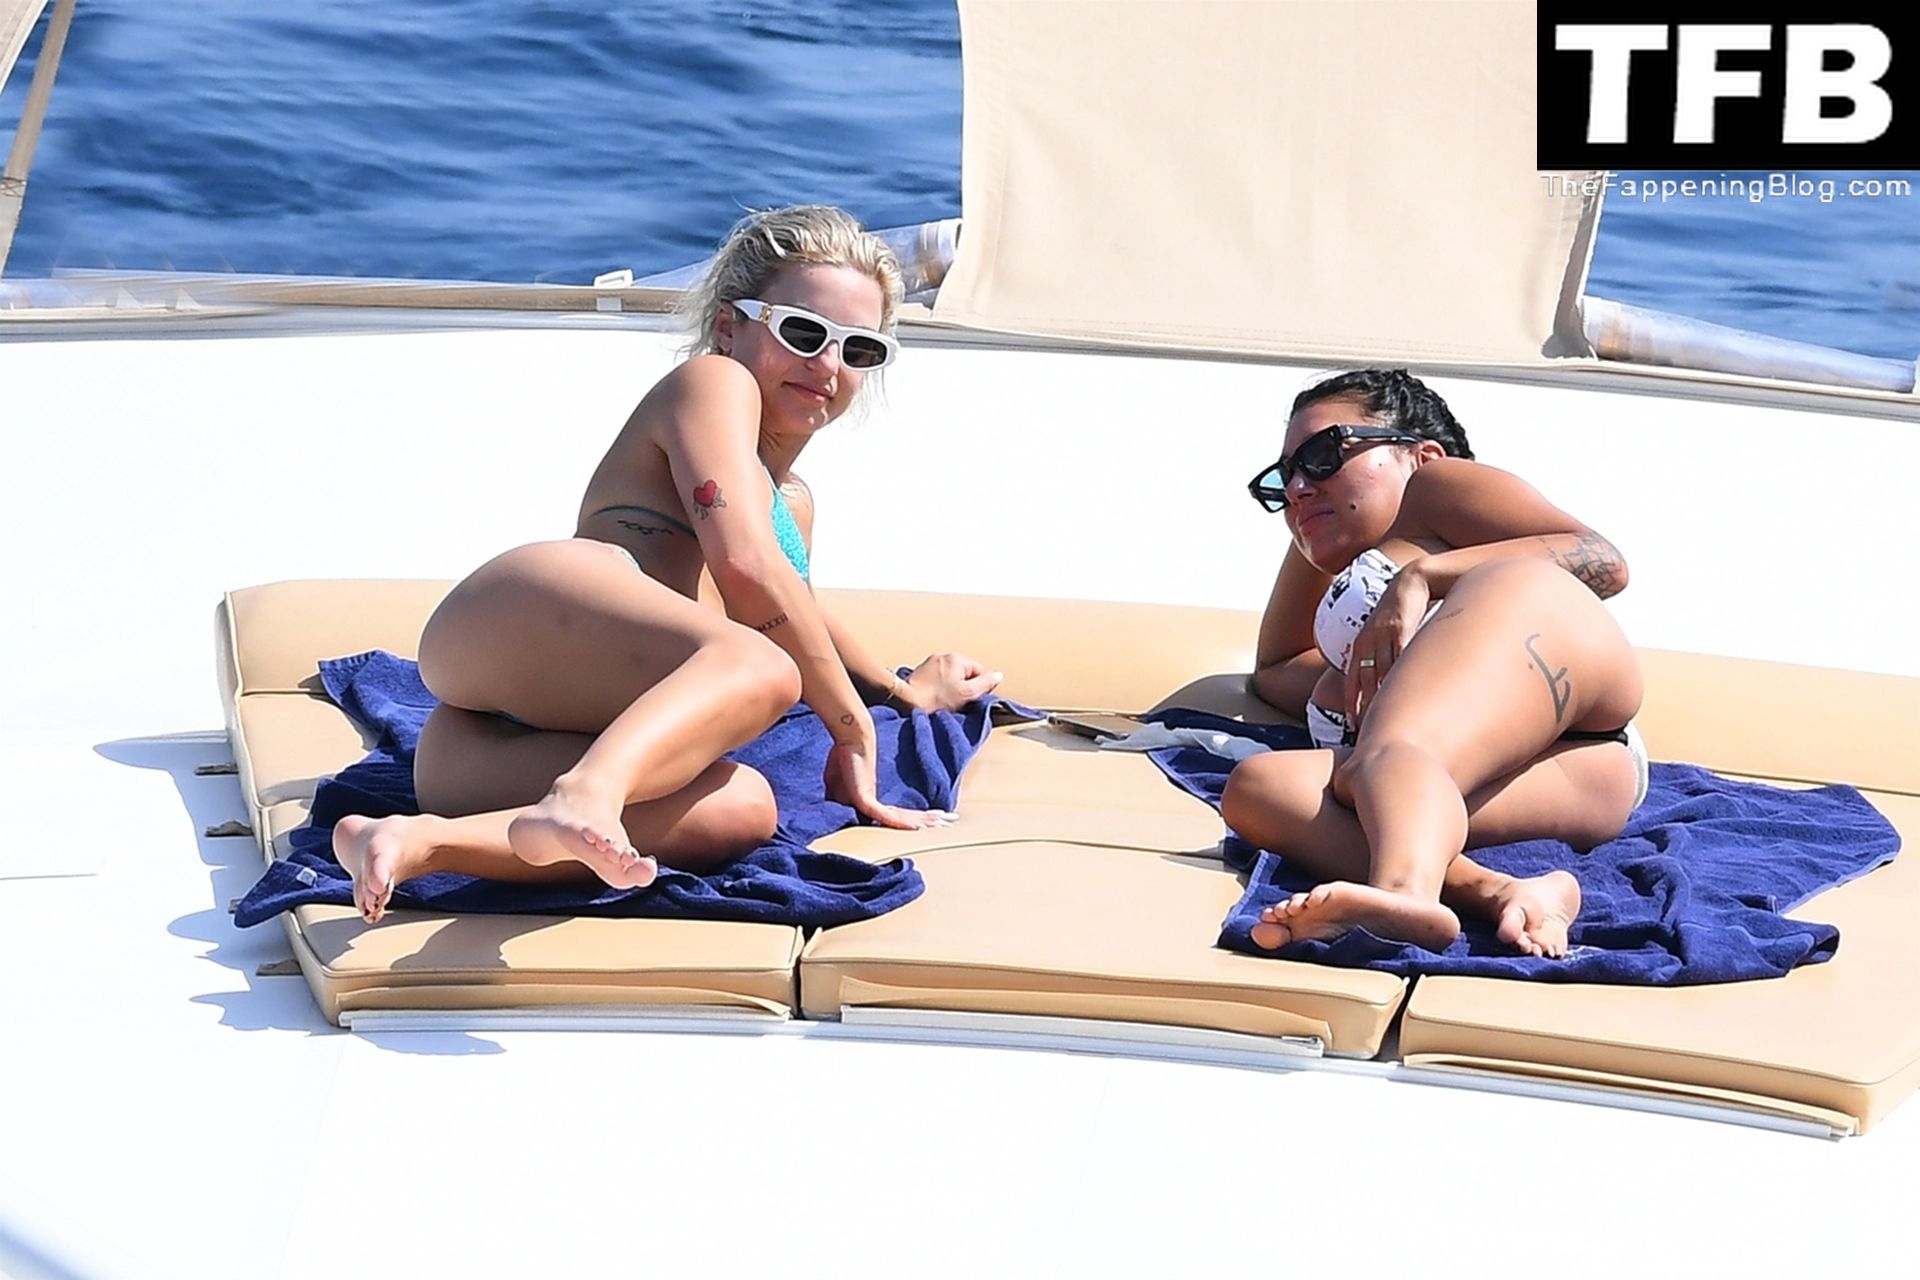 Ella Ding &amp; Domenica Calarco Show Off Their Nude Tits While on Holiday on the Amalfi Coast (55 Photos)